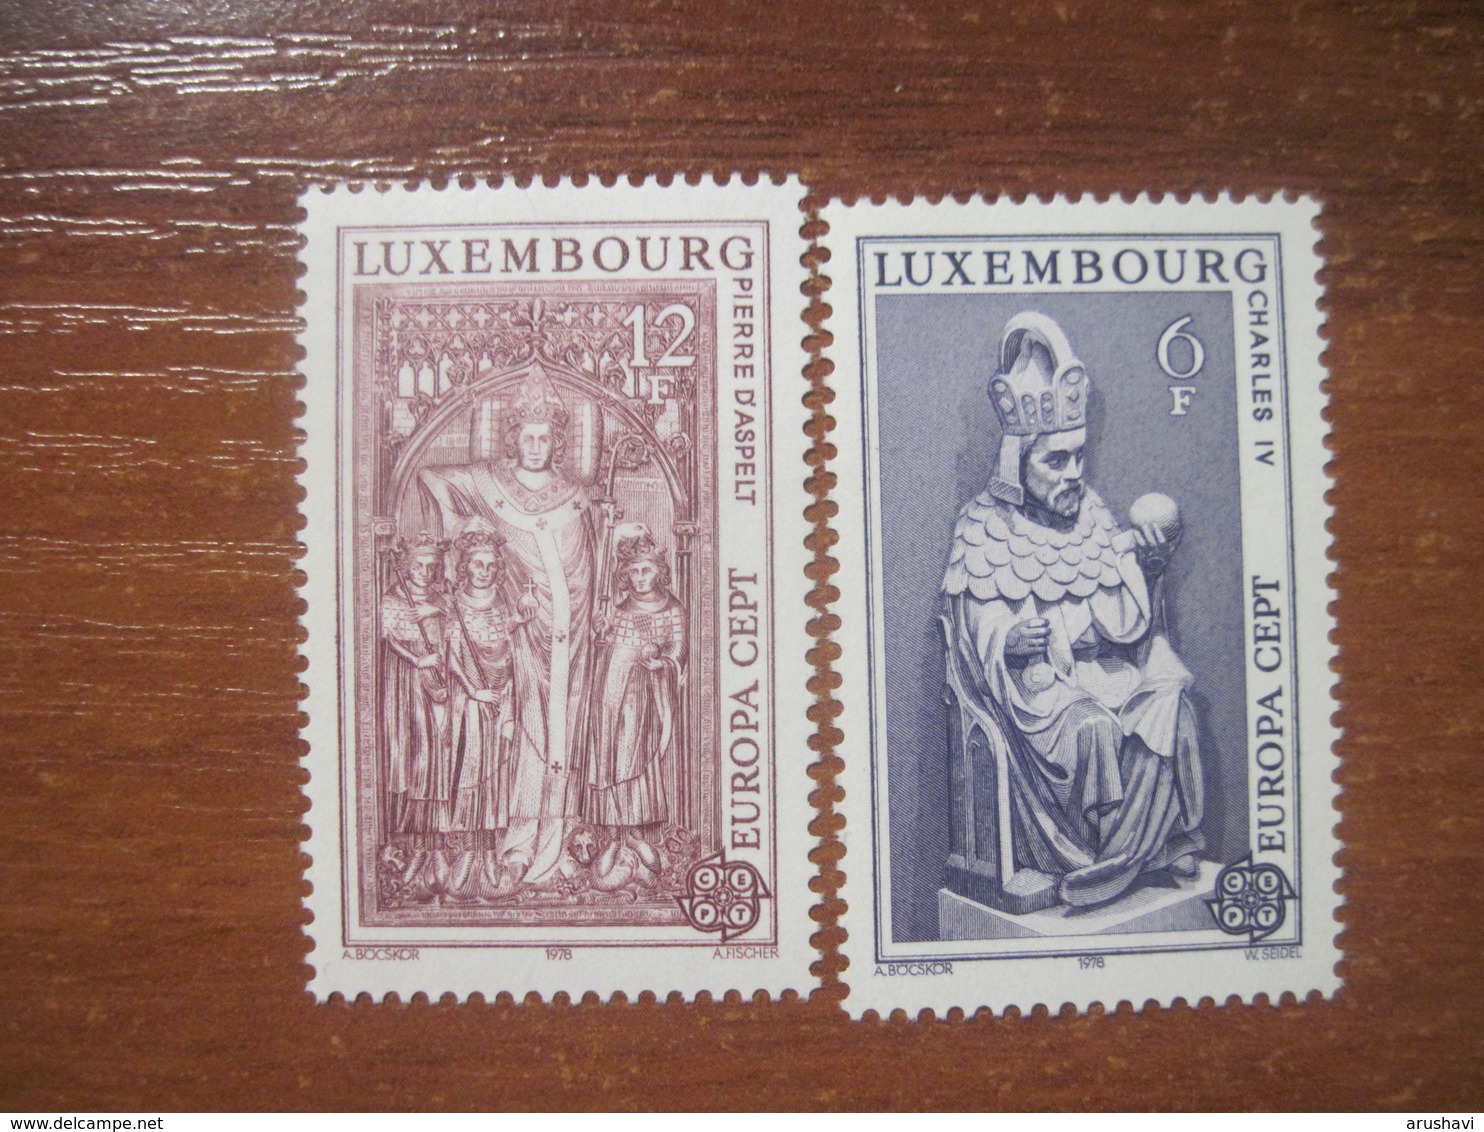 Luxembourg 1978 EUROPA CEPT Architecture MNH - 1978